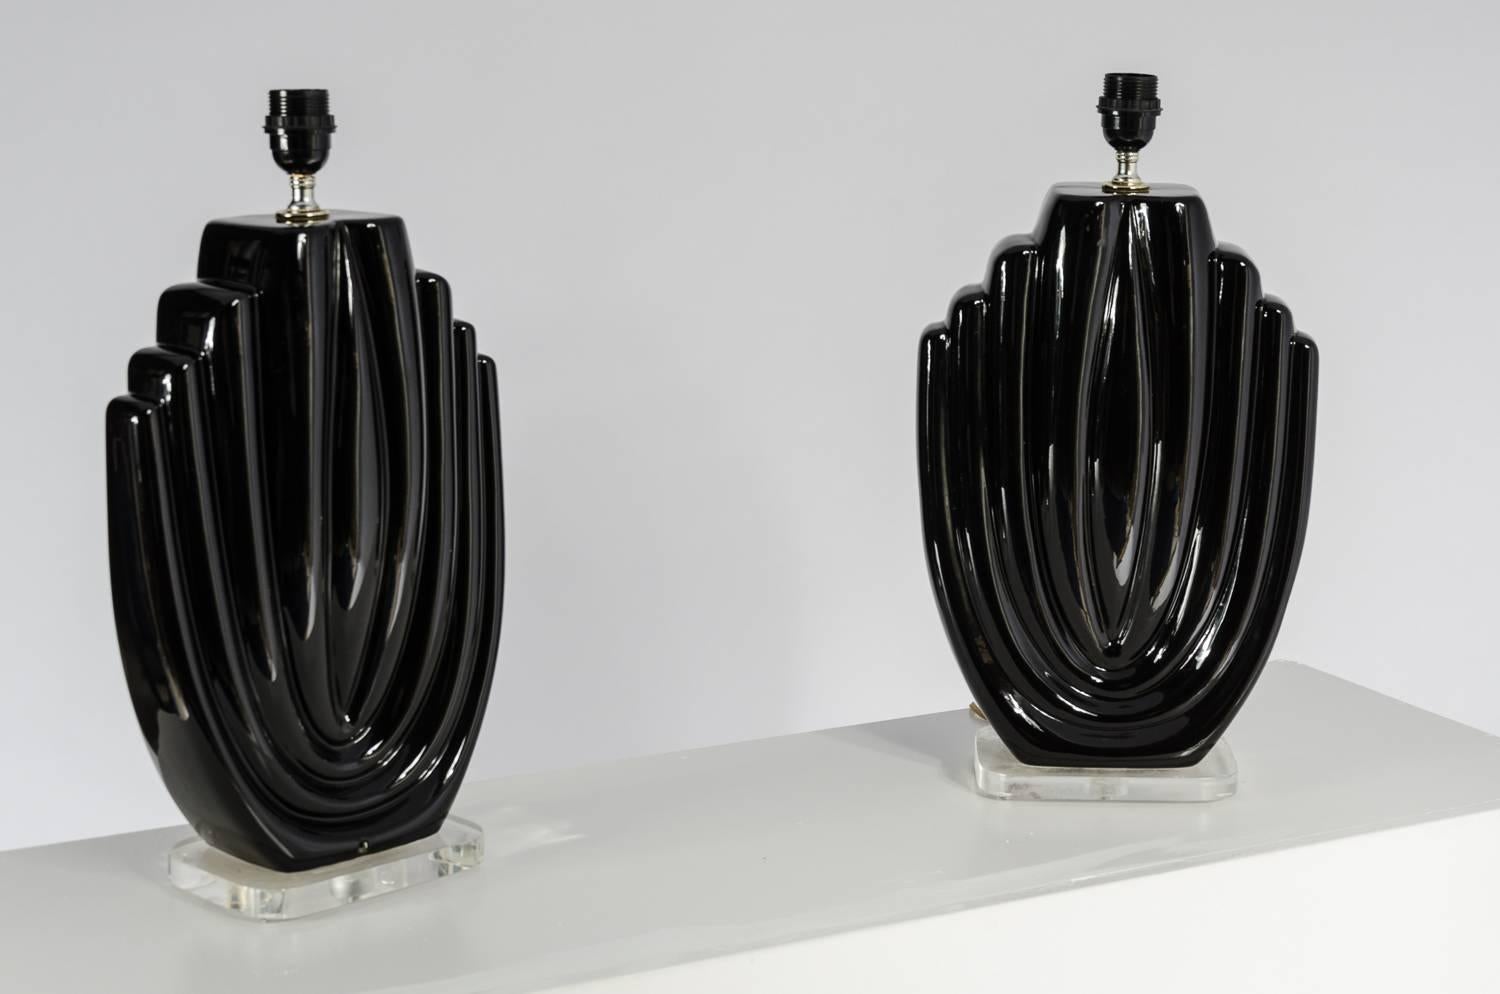 Pair of ceramics and Lucite lamps, circa 1980s, dimensions are without the shades.